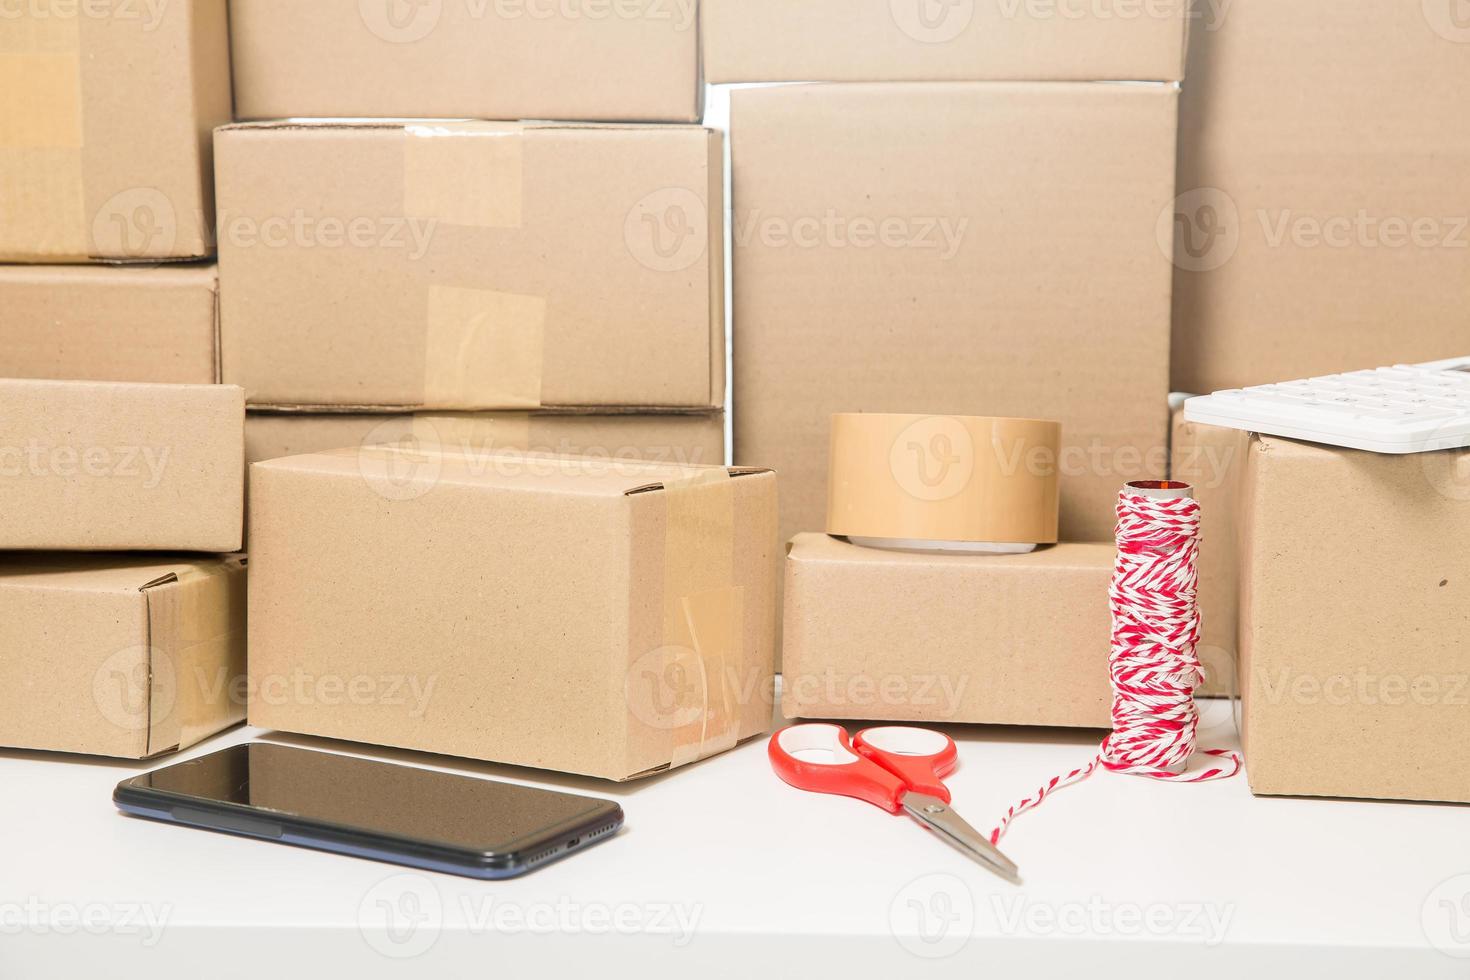 Equipments for SME online business, delivery business laptop, barcode, boxes, checking product on stocks or cardboard parcels. Small business working at home office. delivery service product at home. photo